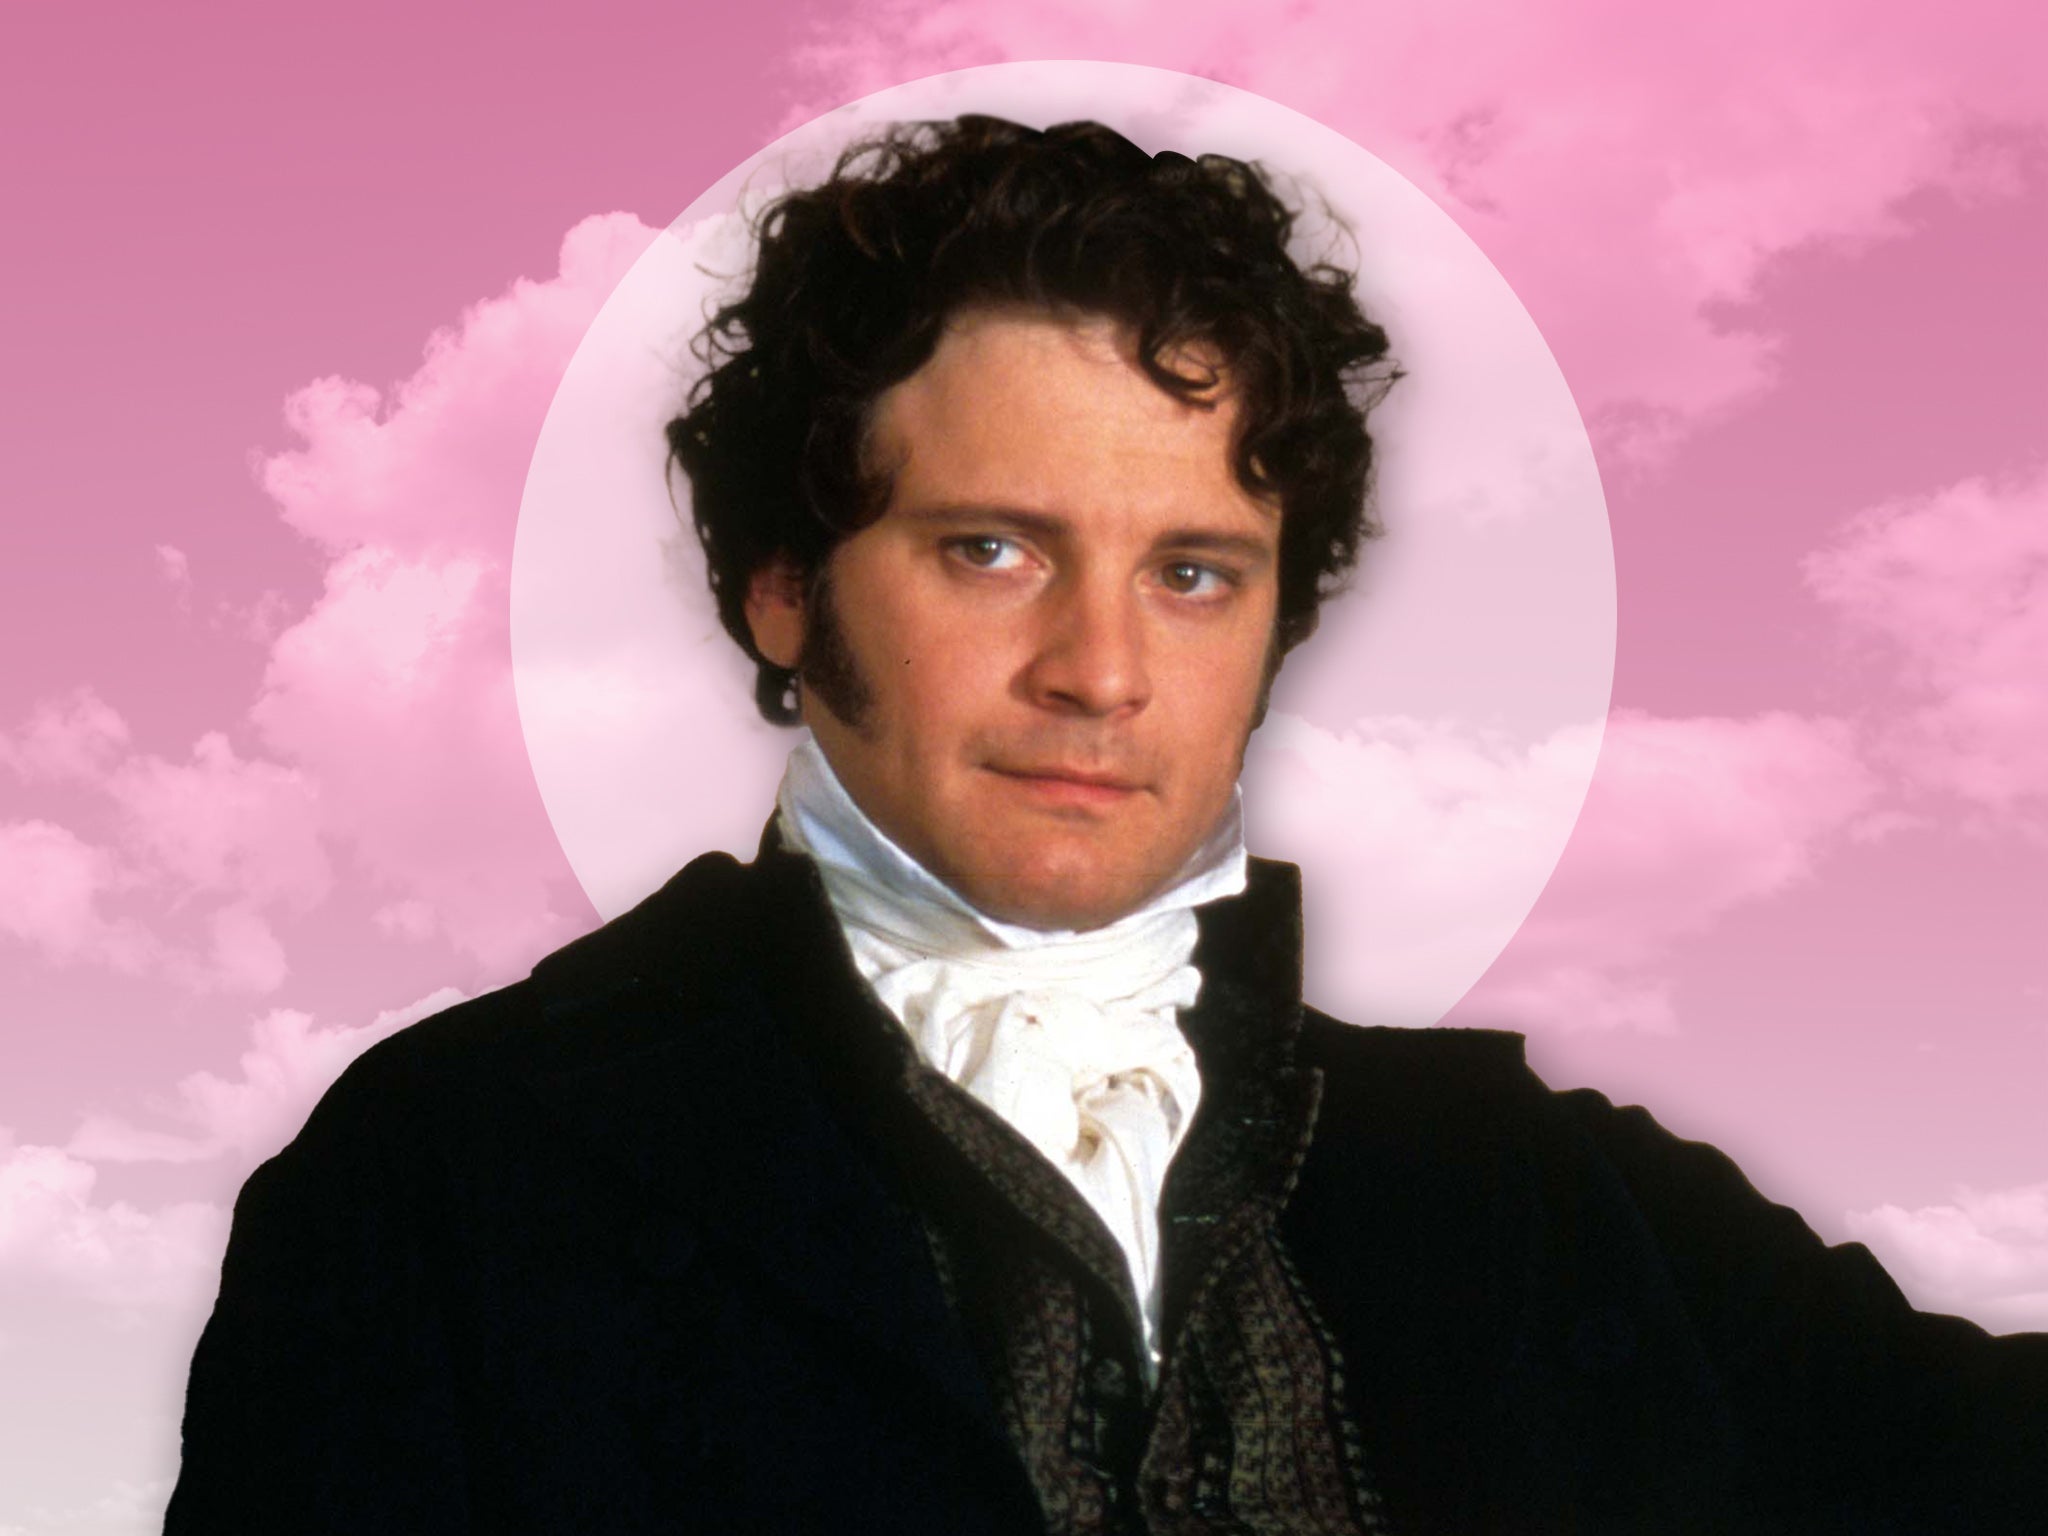 In want of a wife: Colin Firth plays Mr Darcy in the BBC’s lauden Austen adaptation